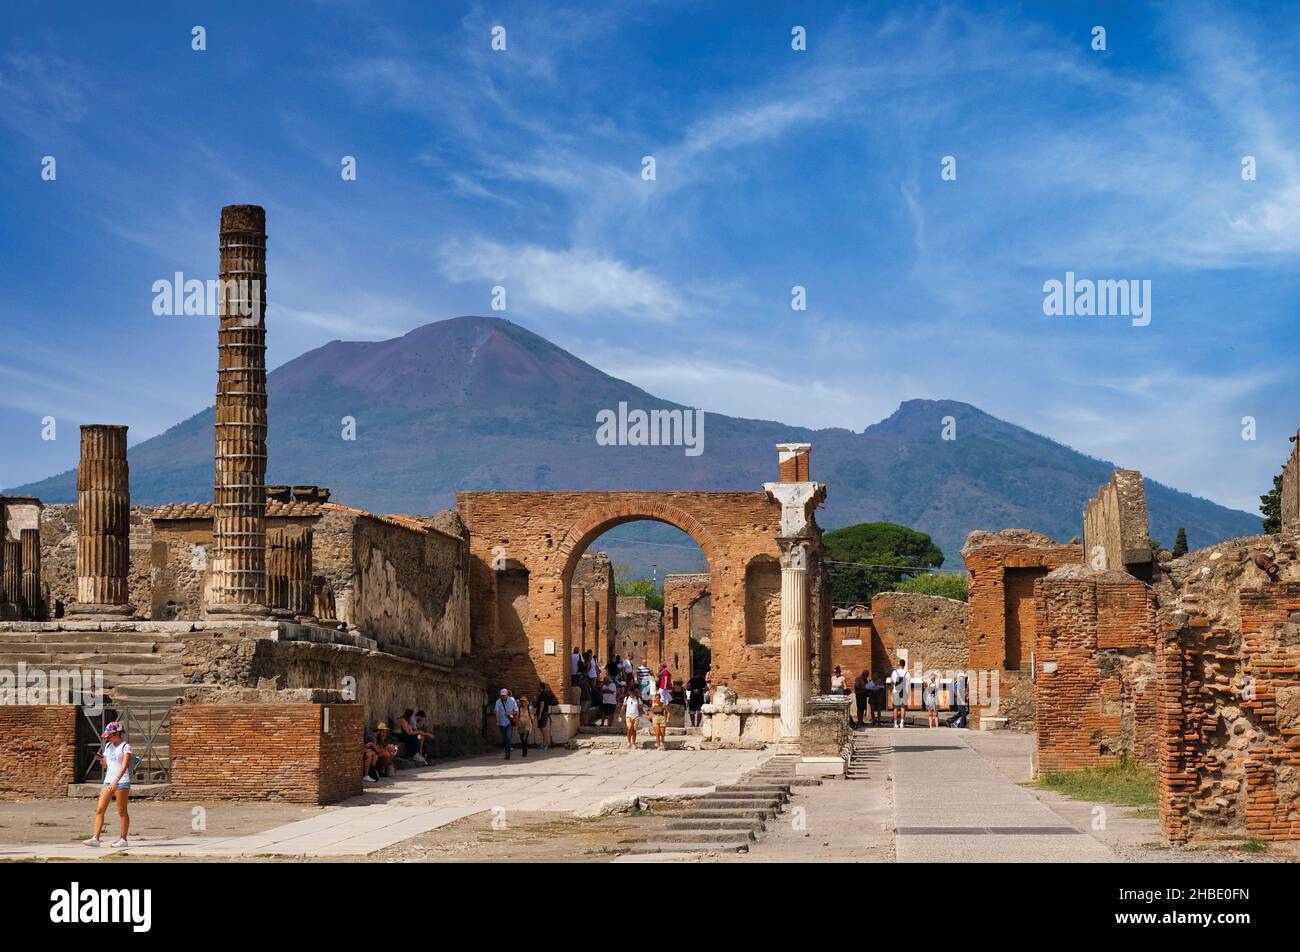 Forum of Pompeii destroyed by the eruption of the volcano Vesuvius, view of the forum and Temple of Jupiter with Mount Vesuvius in the background Stock Photo